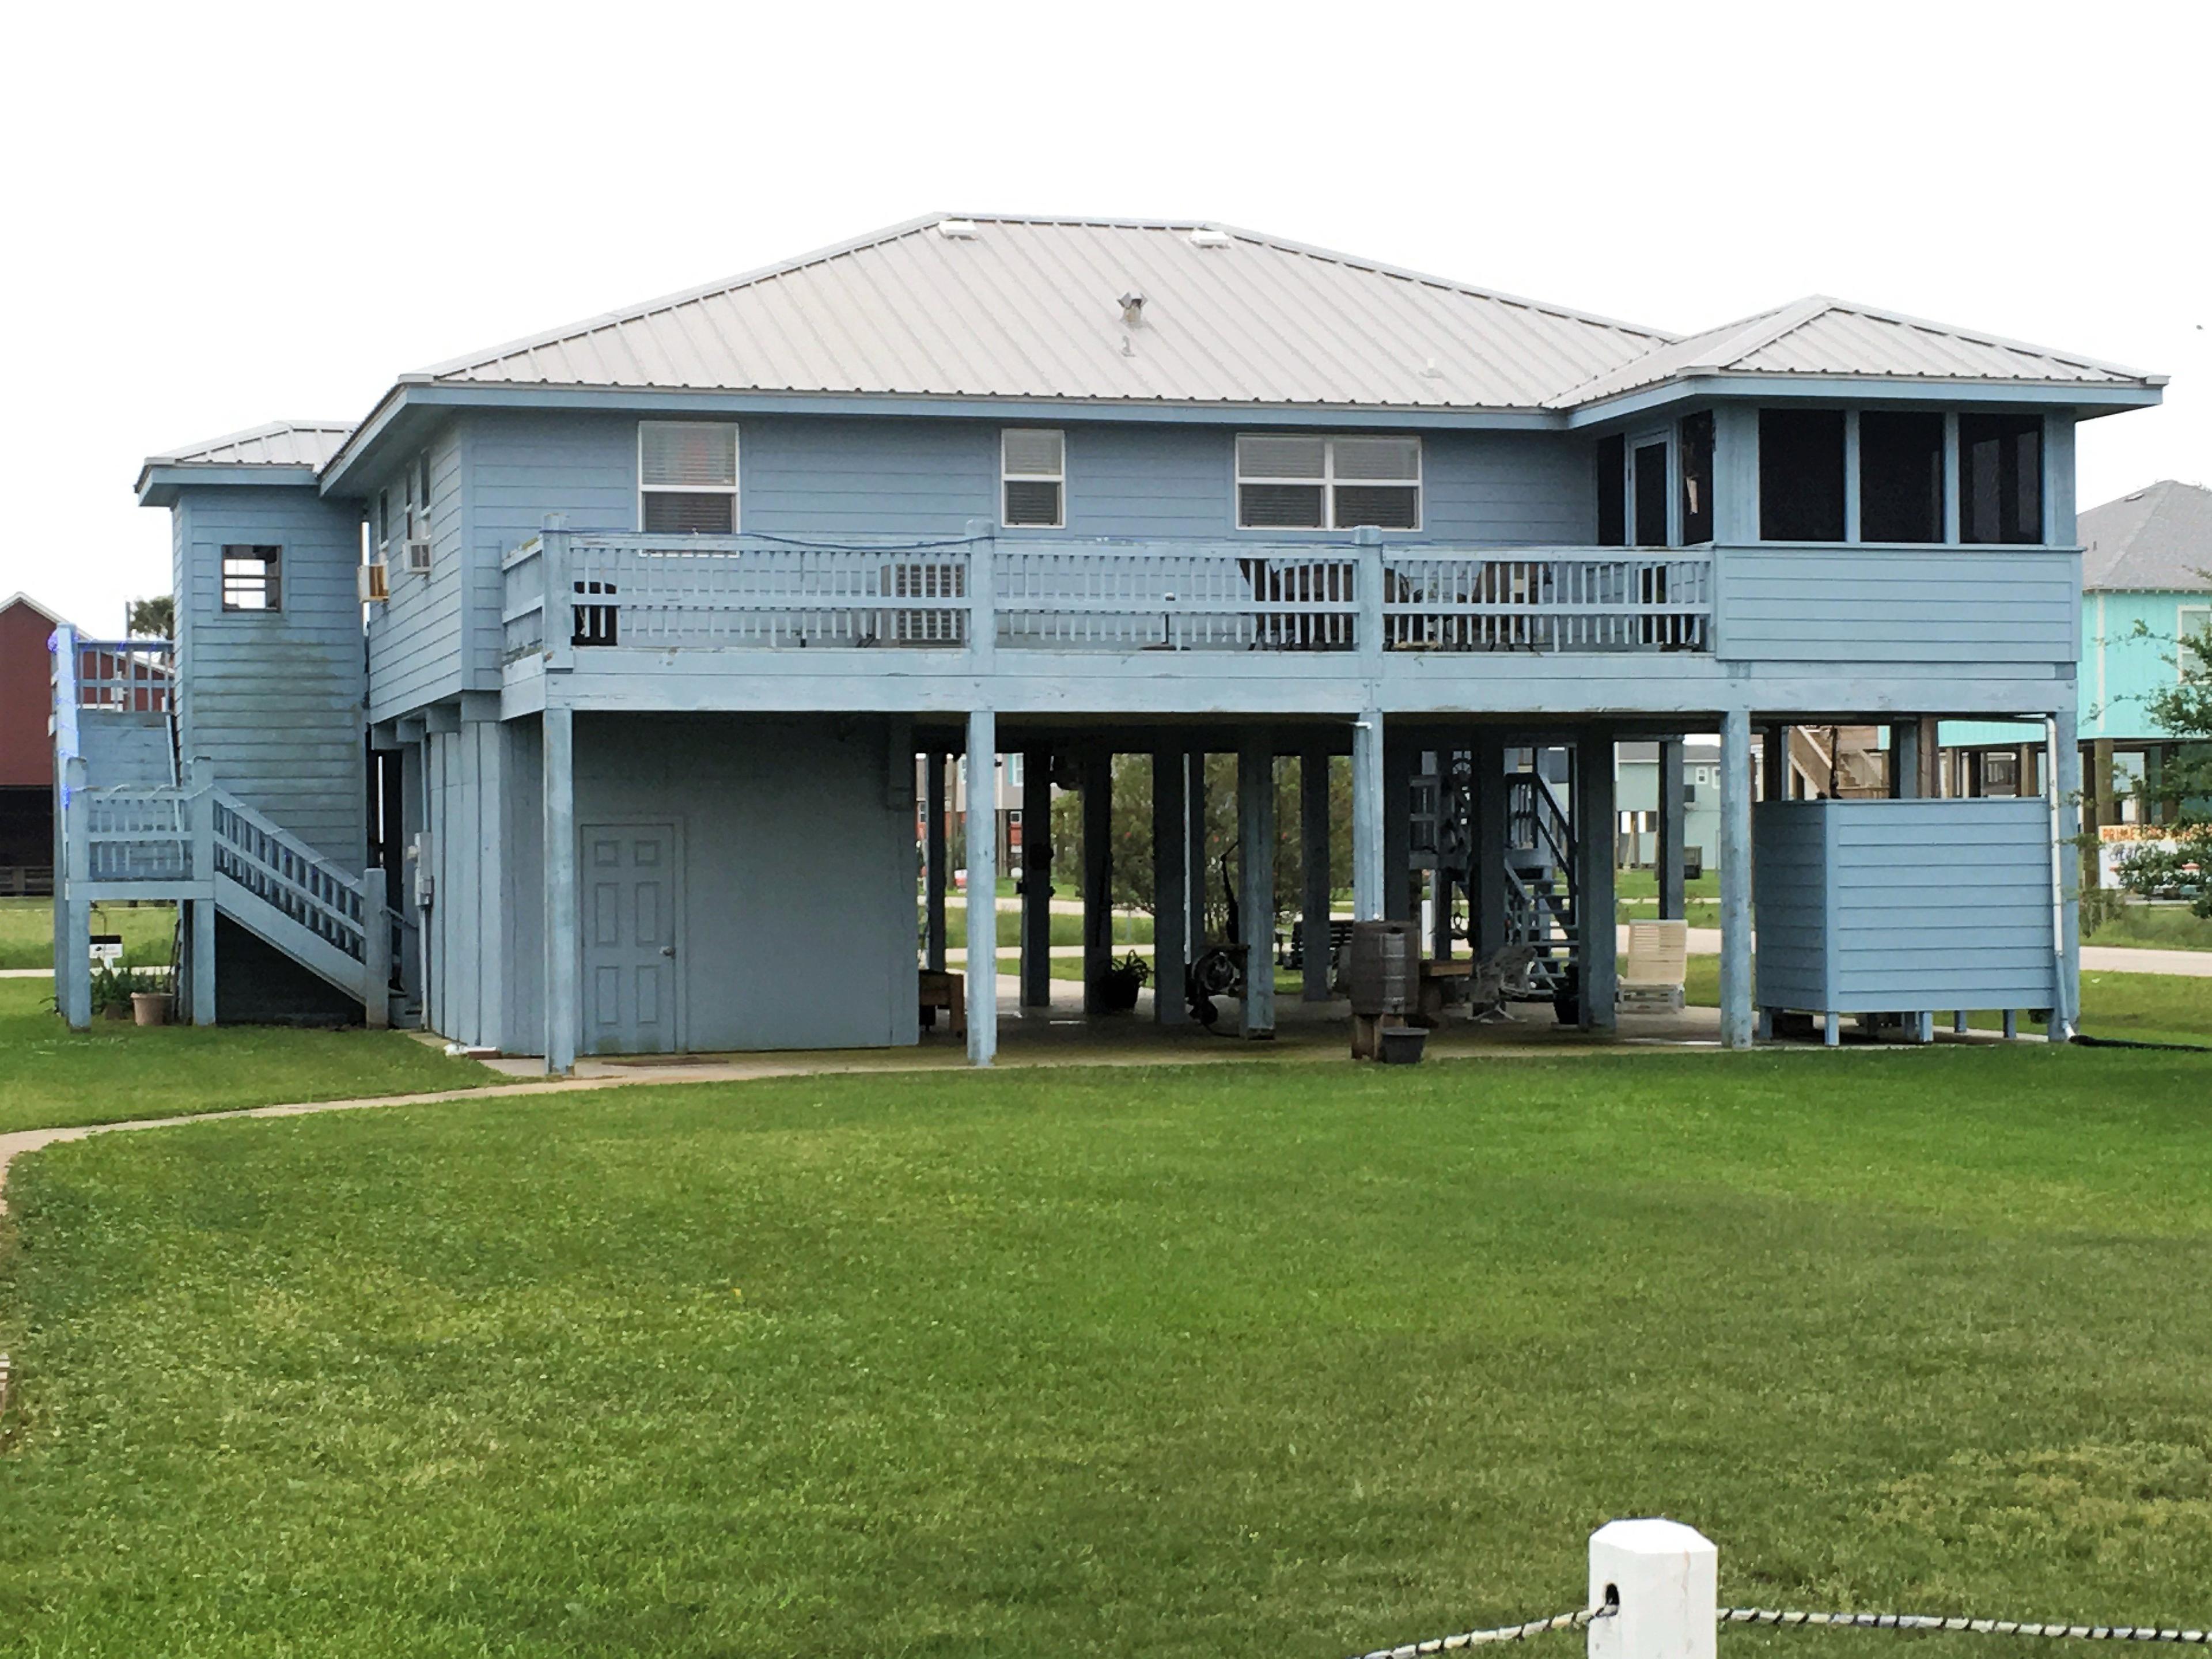 Tract 1: Ocean View Beach House with 2 bedrooms, 1.5 baths and enclosed elevator